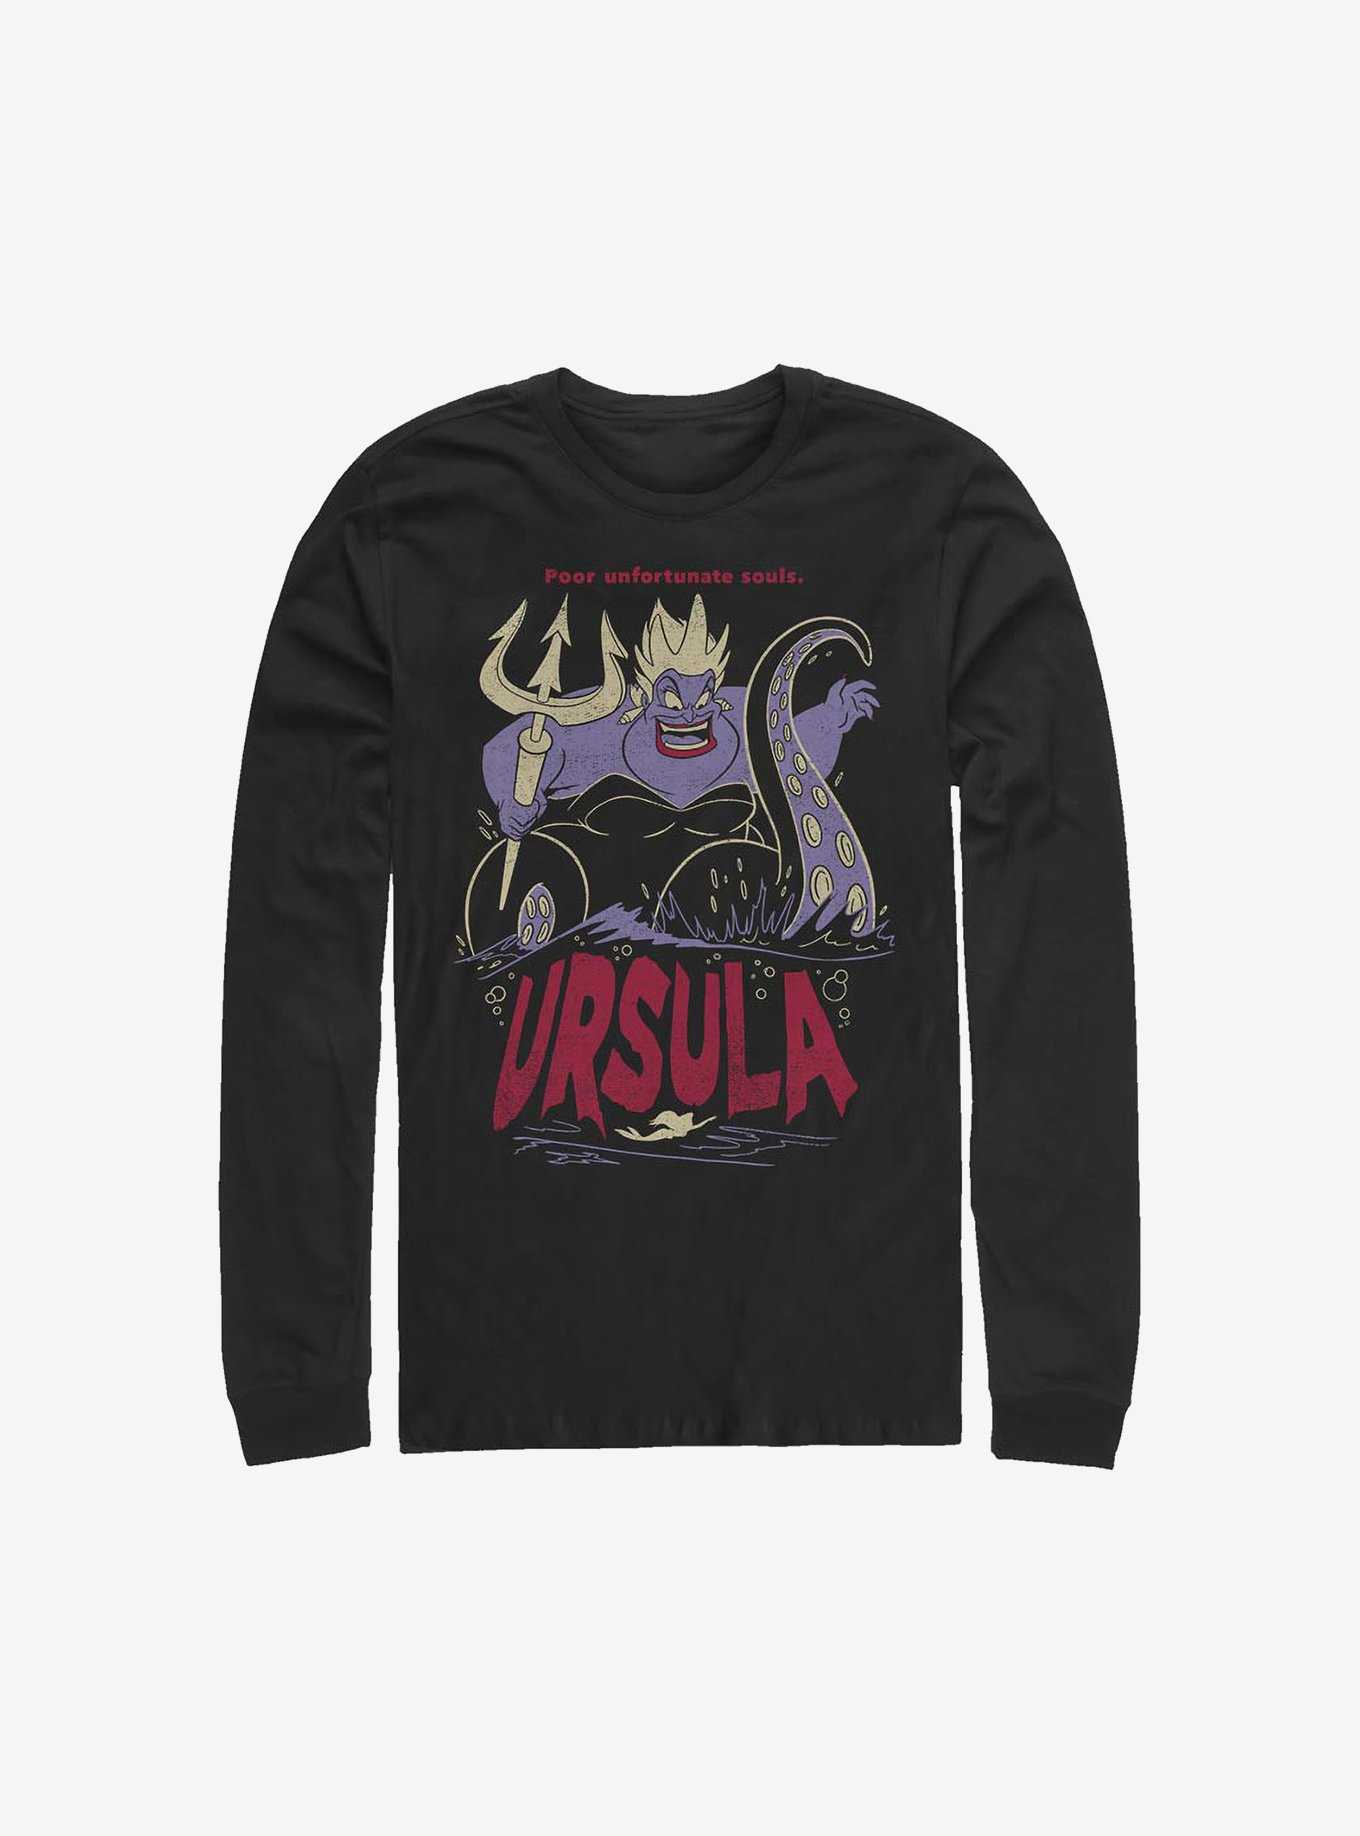 Disney The Little Mermaid Ursula The Sea Witch Long-Sleeve T-Shirt, , hi-res